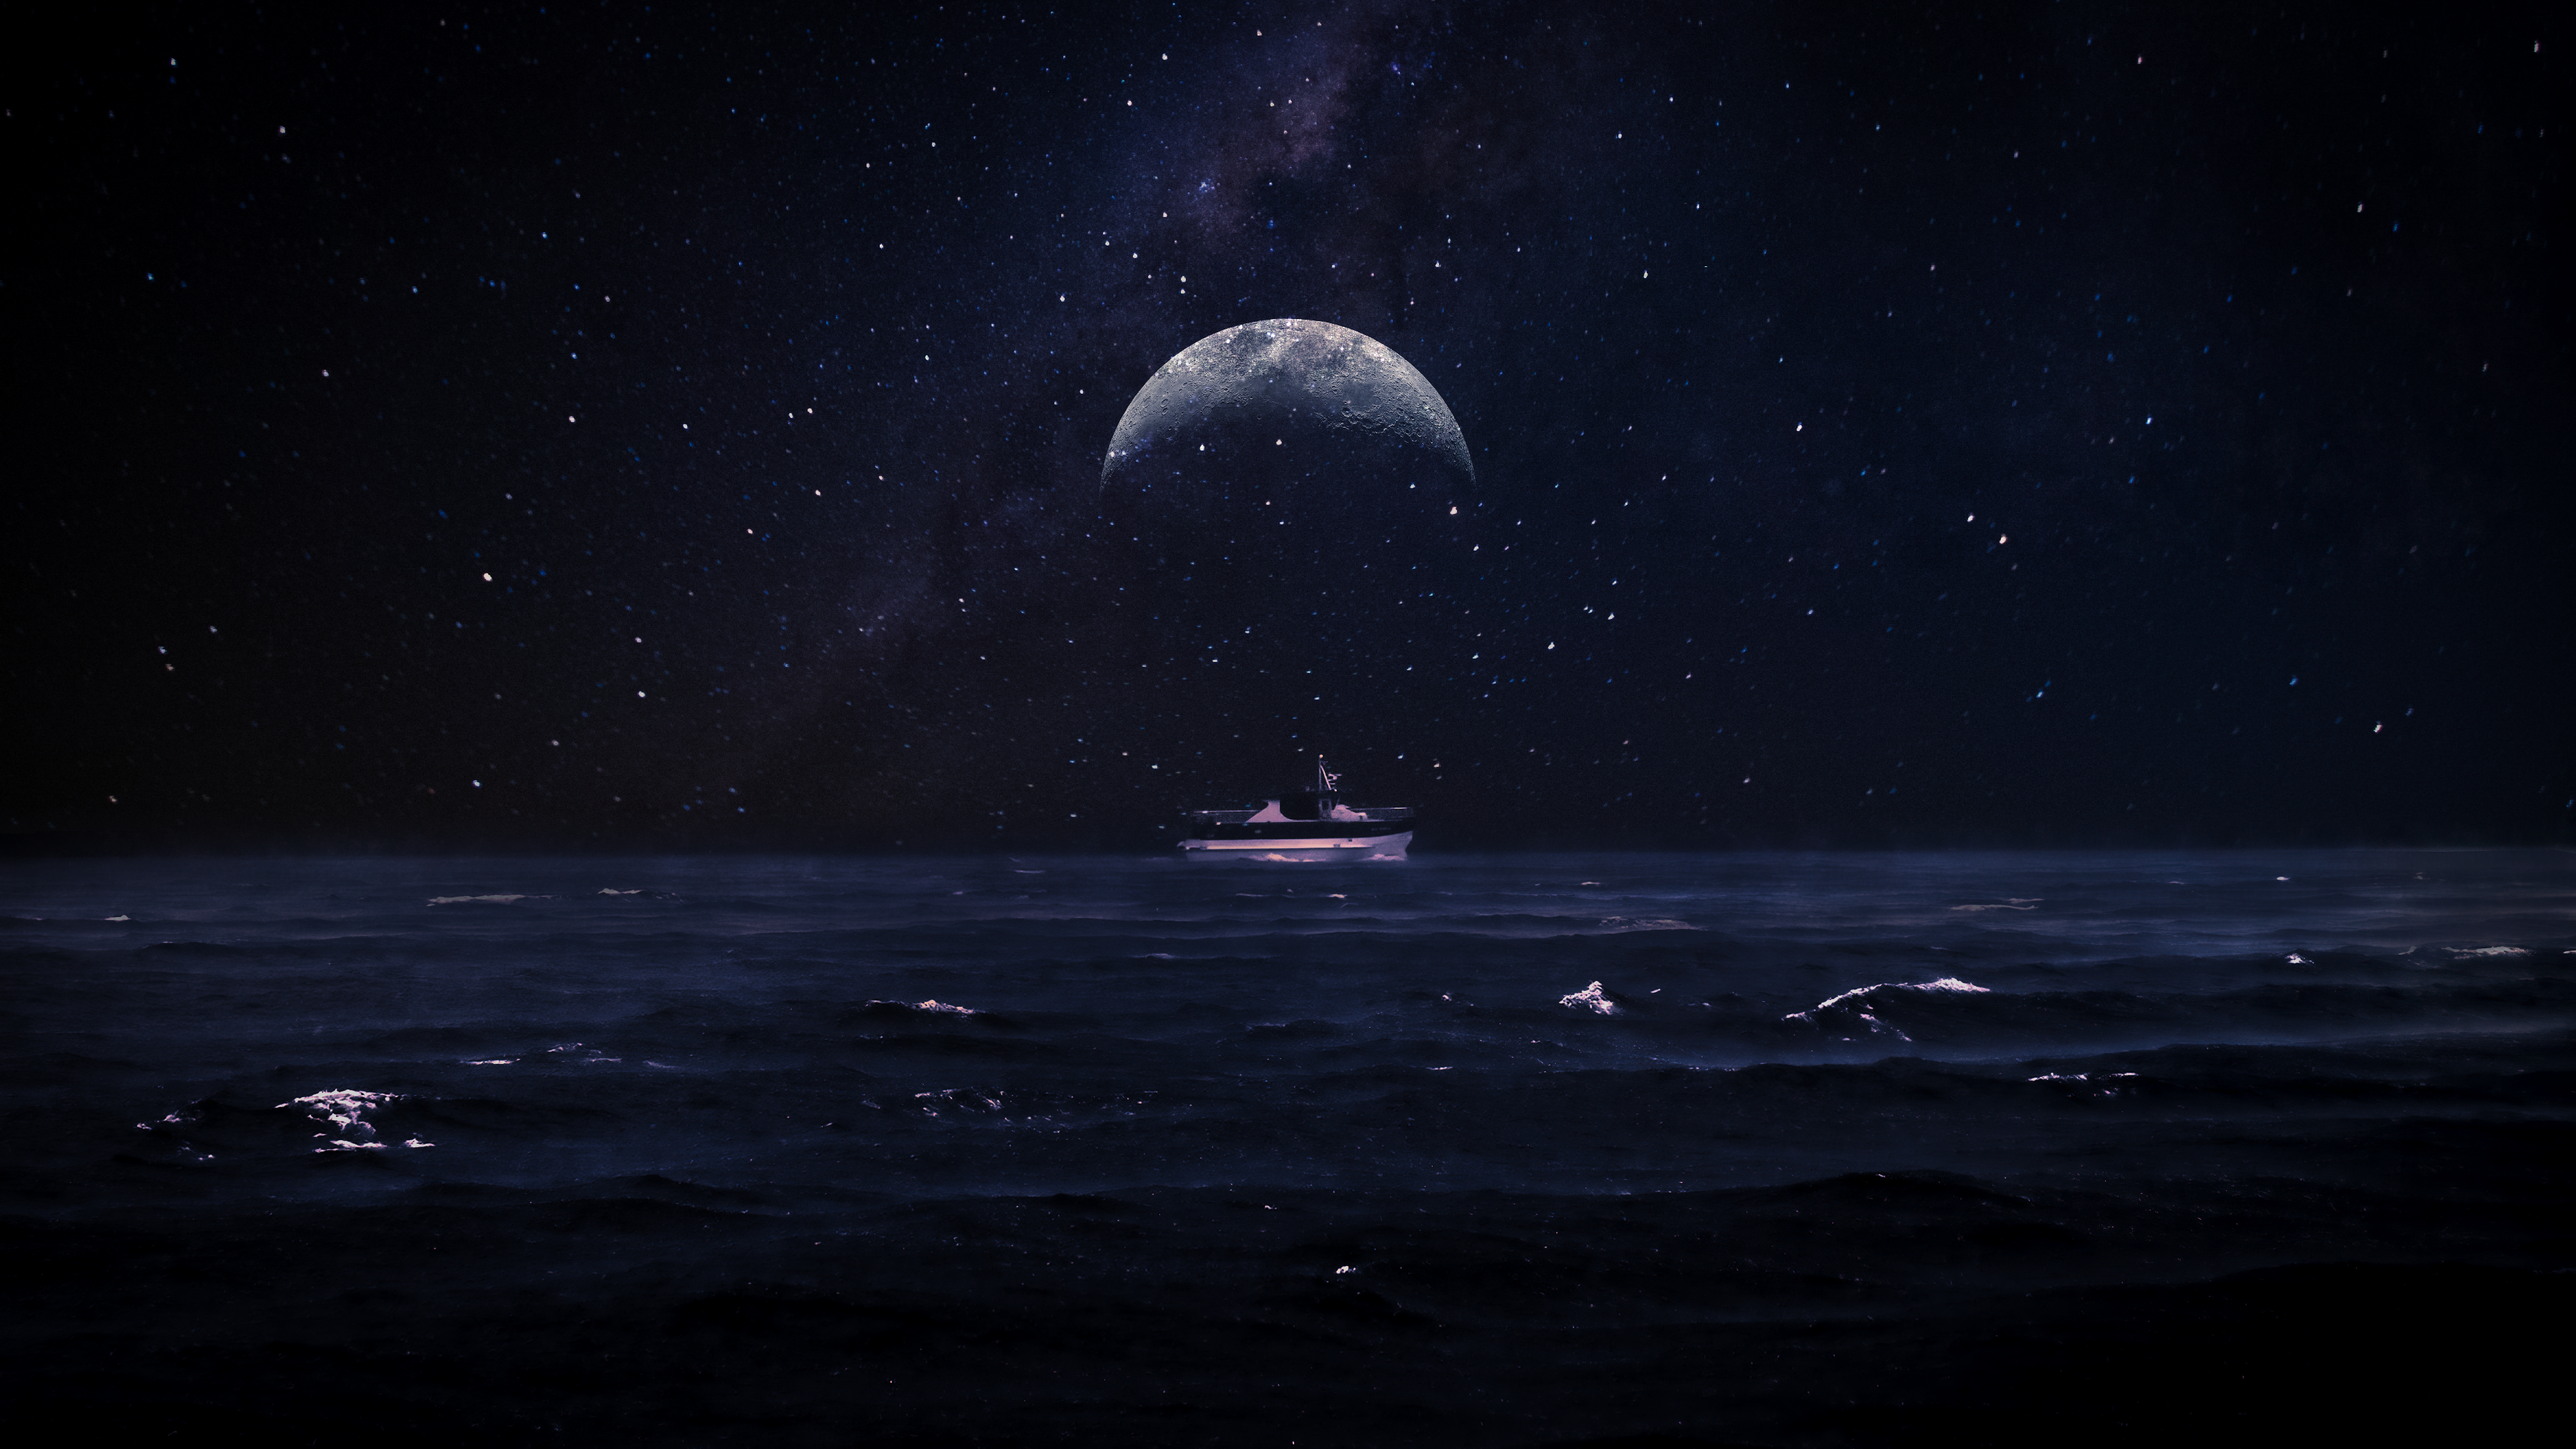 Stars Night Moon Sea Boat Water Landscape Space Planet Surface 3704x2084